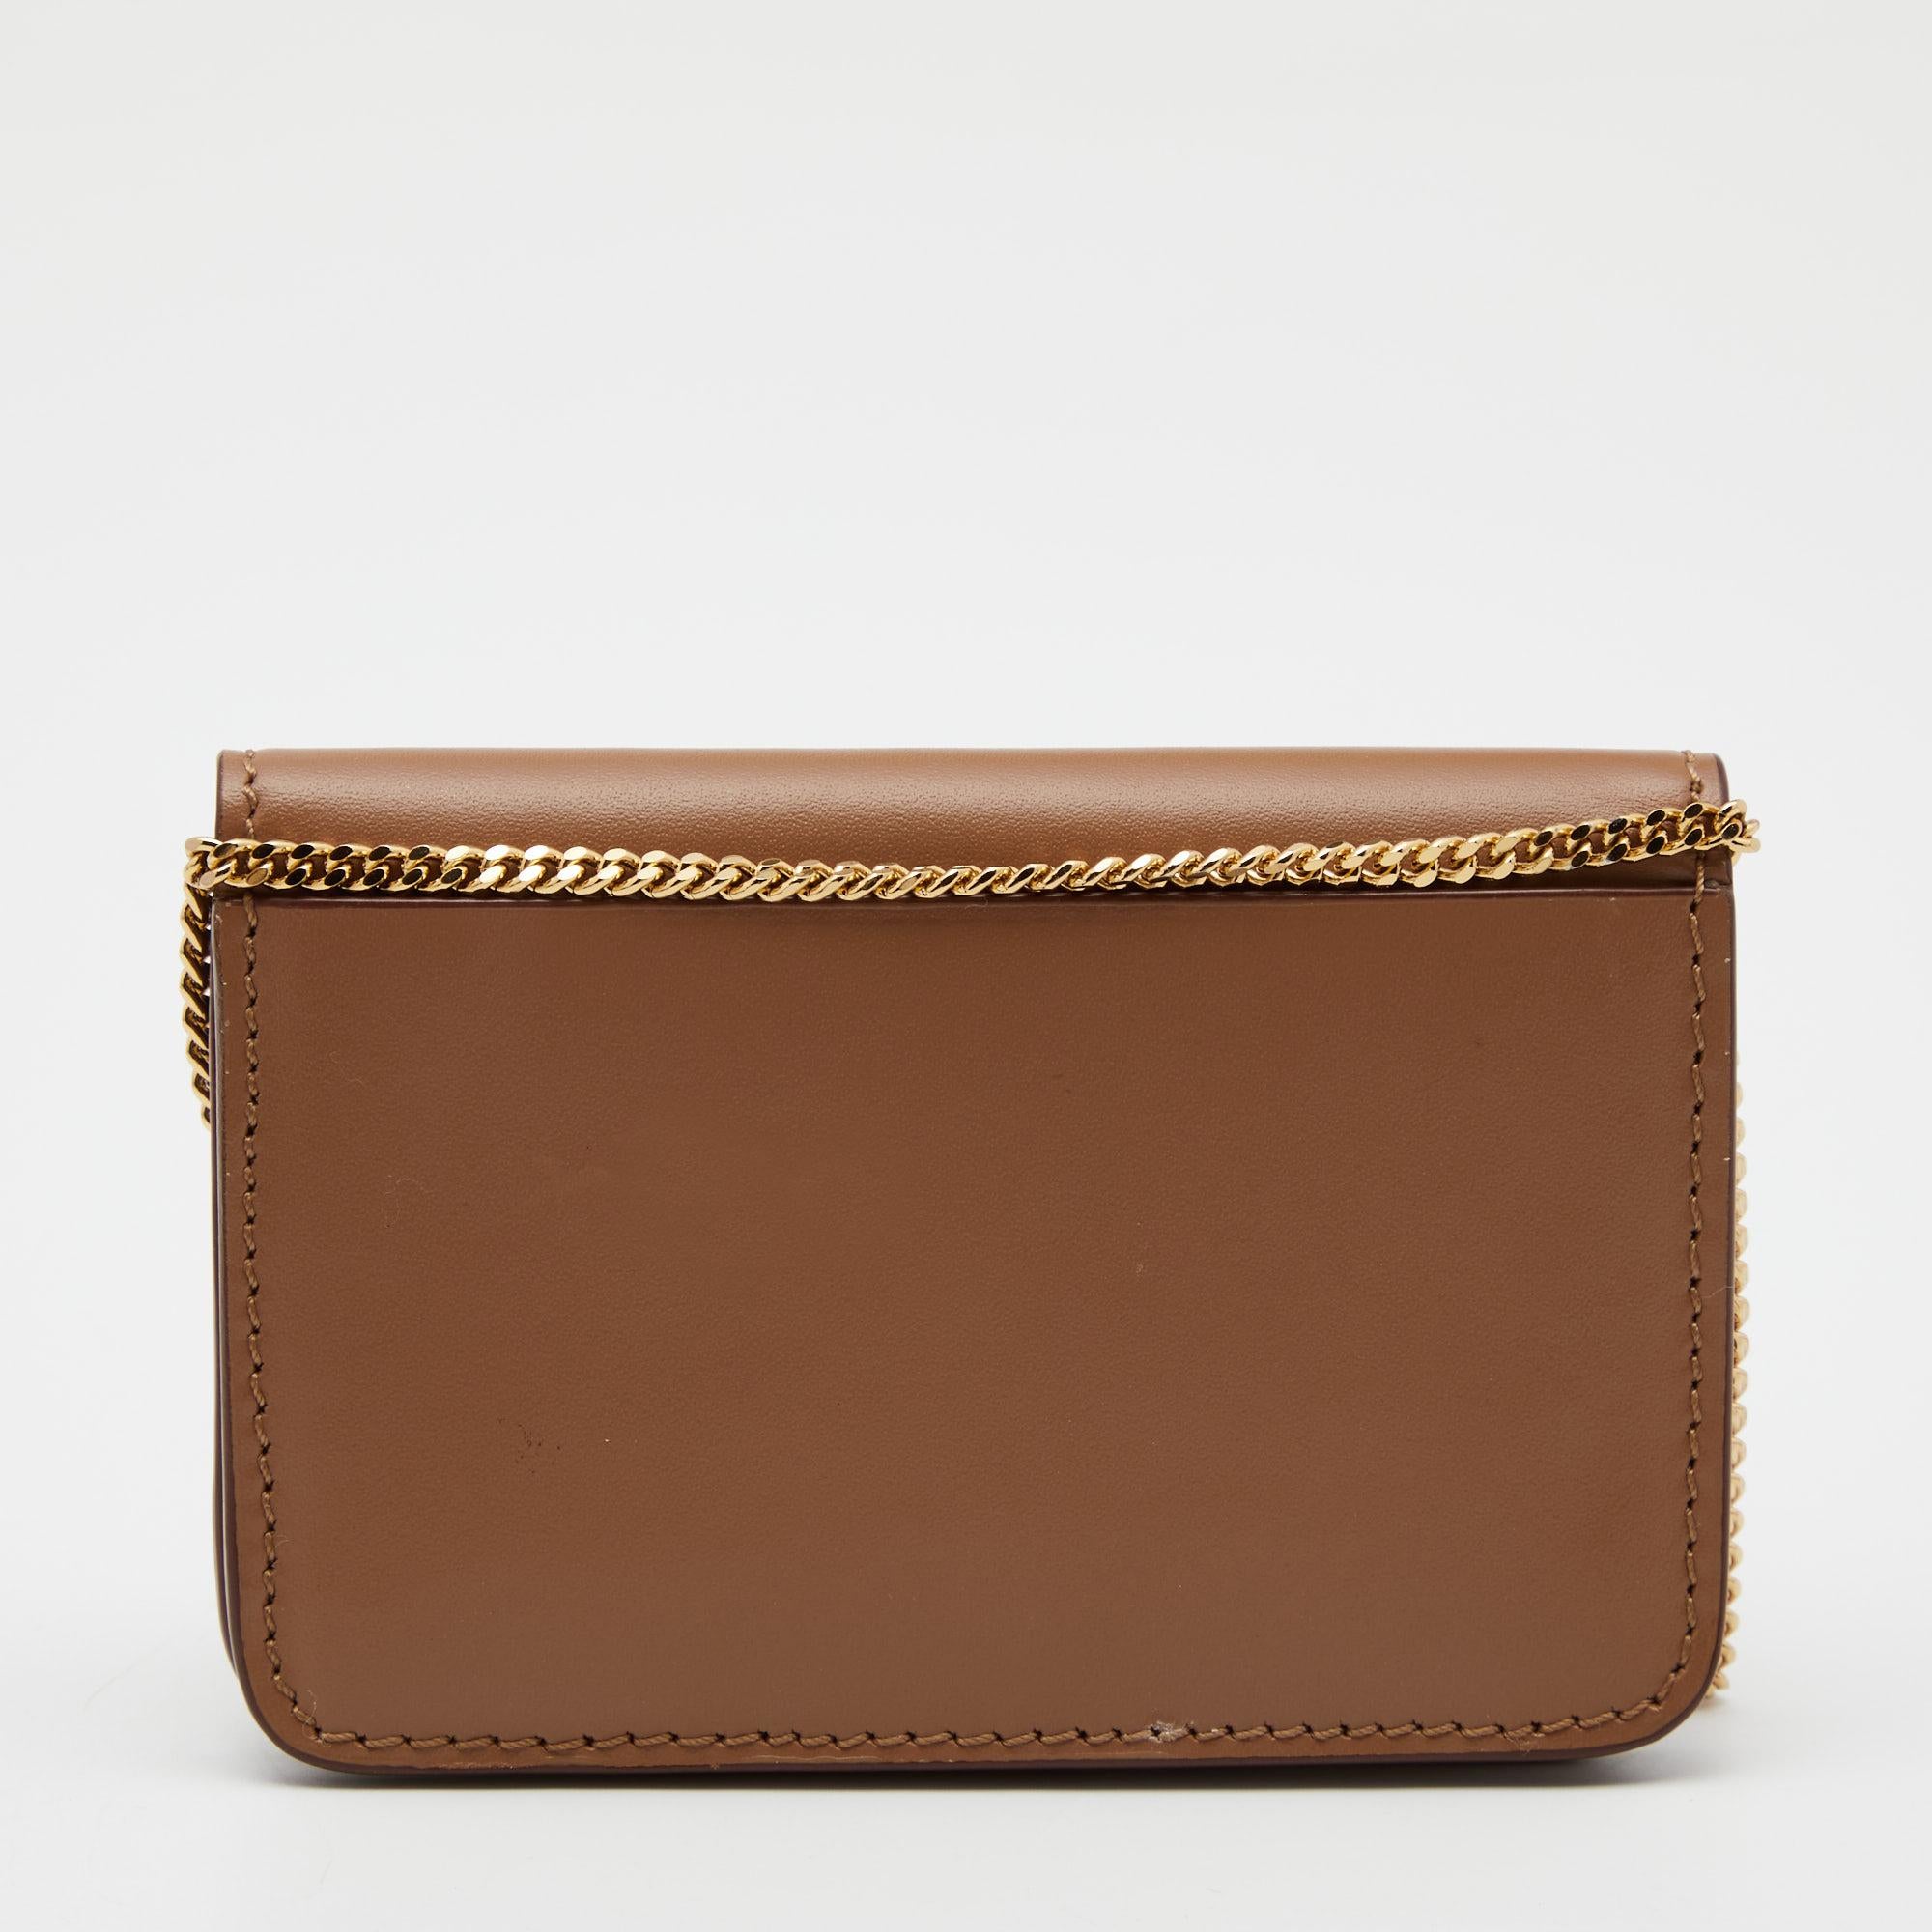 With a clean and classic structure, this Burberry card case is a must-have. It is created from tan leather and displays a brand signature on the front, a chain strap, and a lined interior.

Includes: Original Dustbag